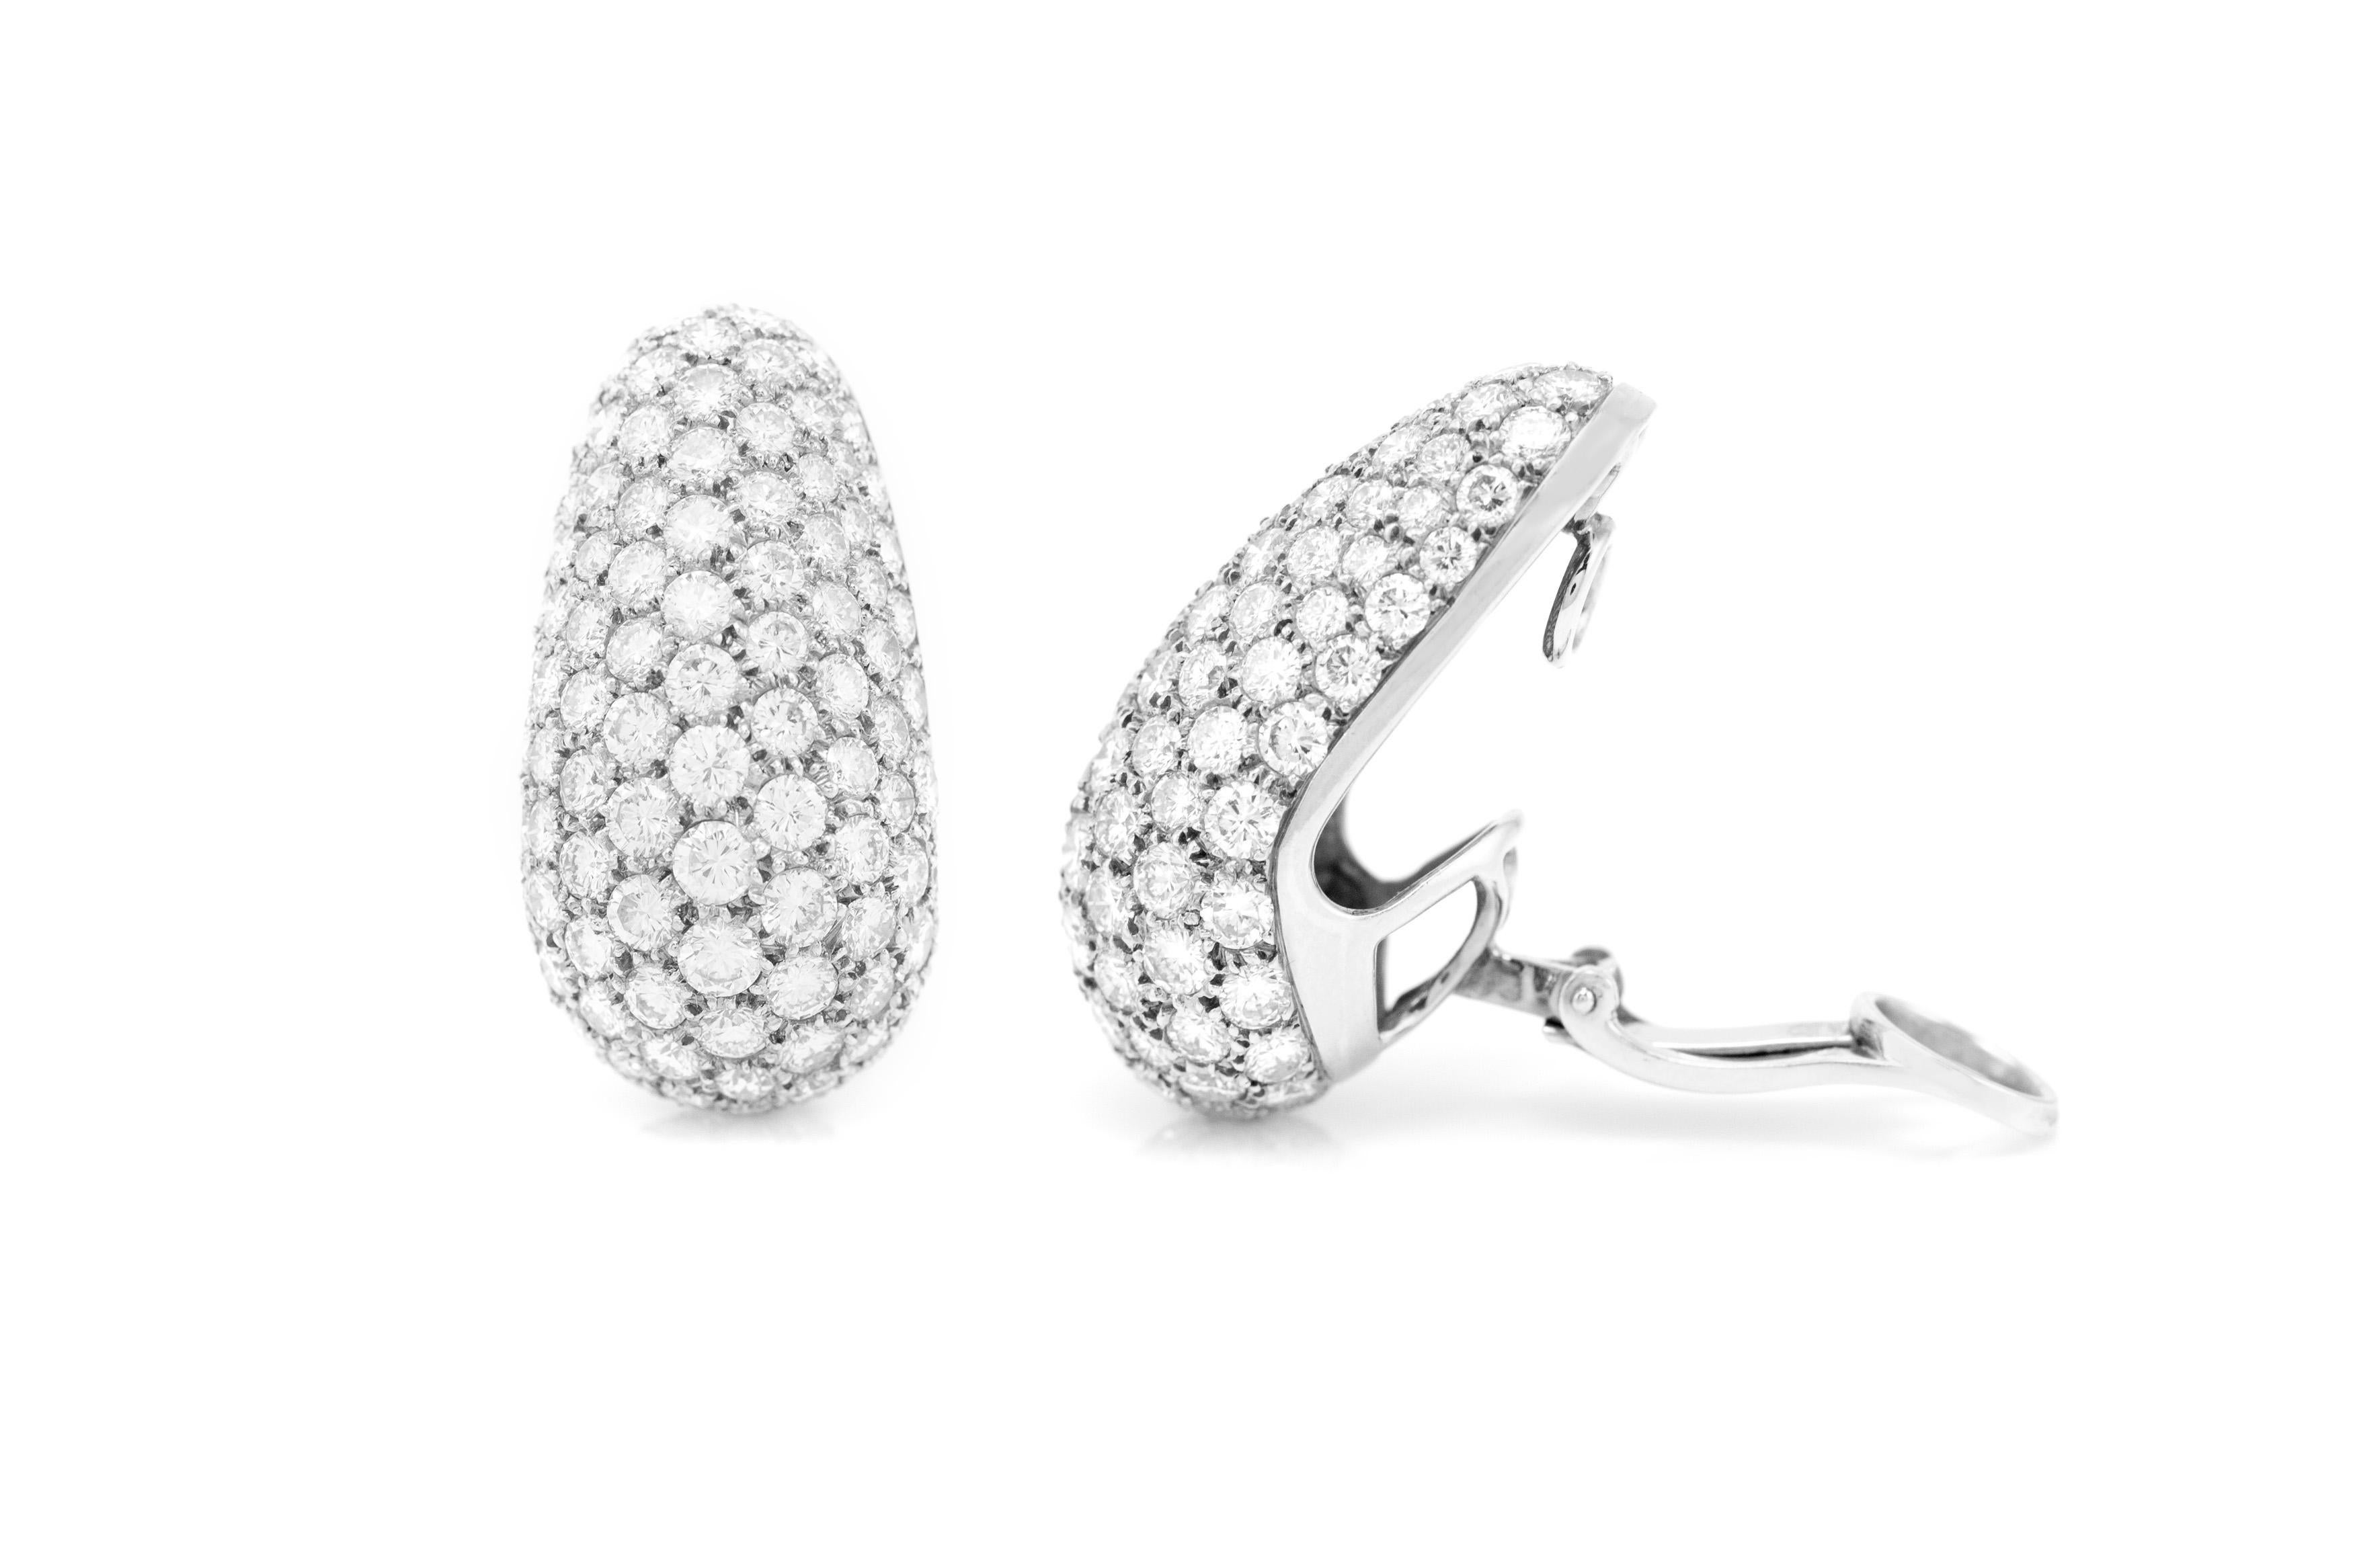 Finely crafted in platinum with Round Brilliant cut Diamonds.
Signed by Van Cleef & Arpels
Circa 1975